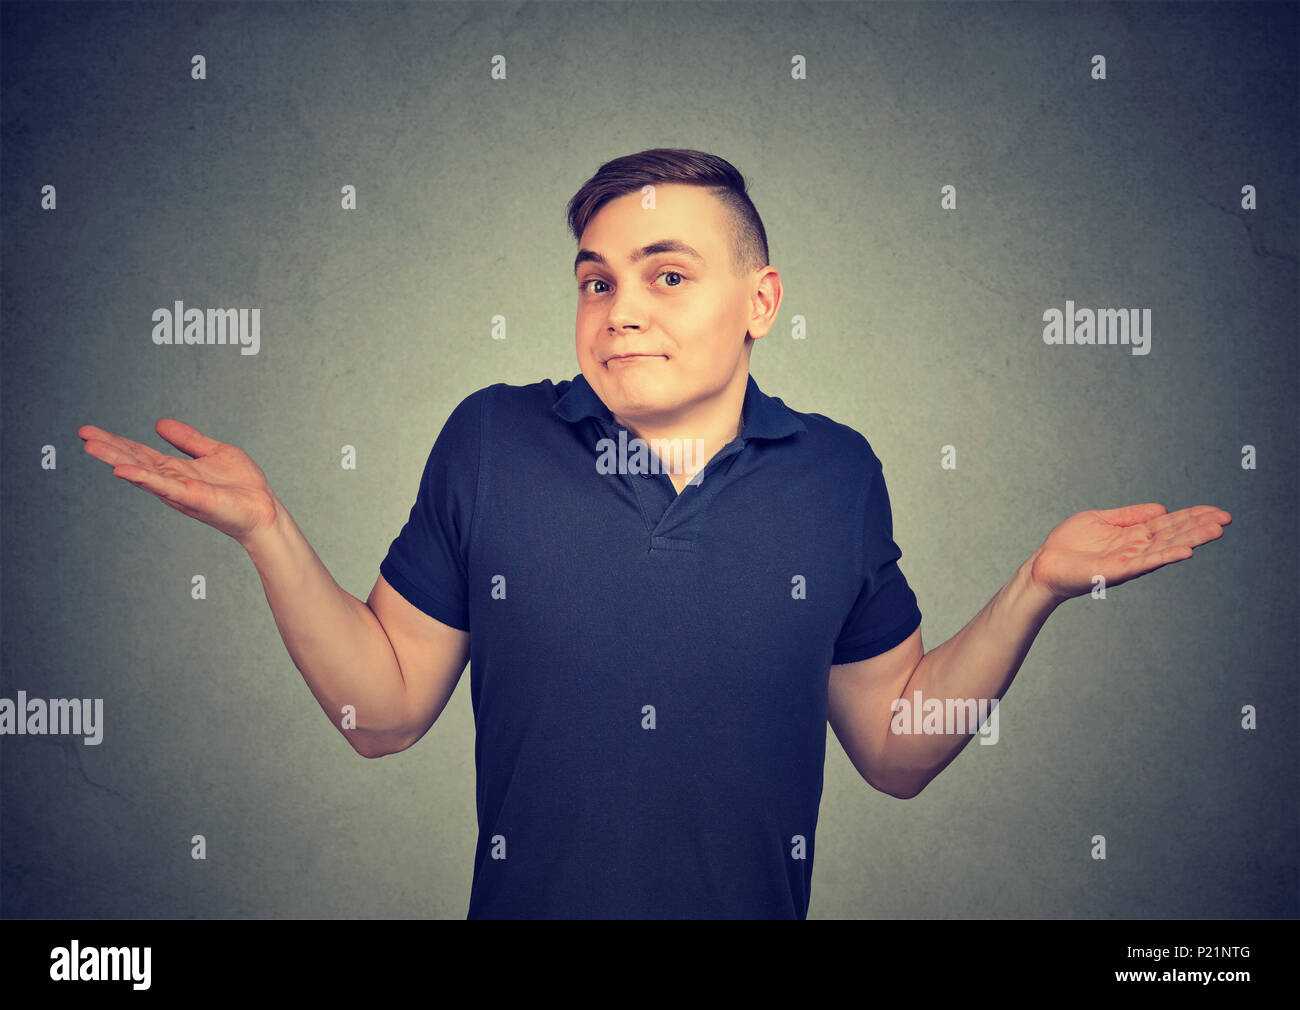 Ignorance. Man shrugging shoulders who cares so what isolated on gray background. Stock Photo